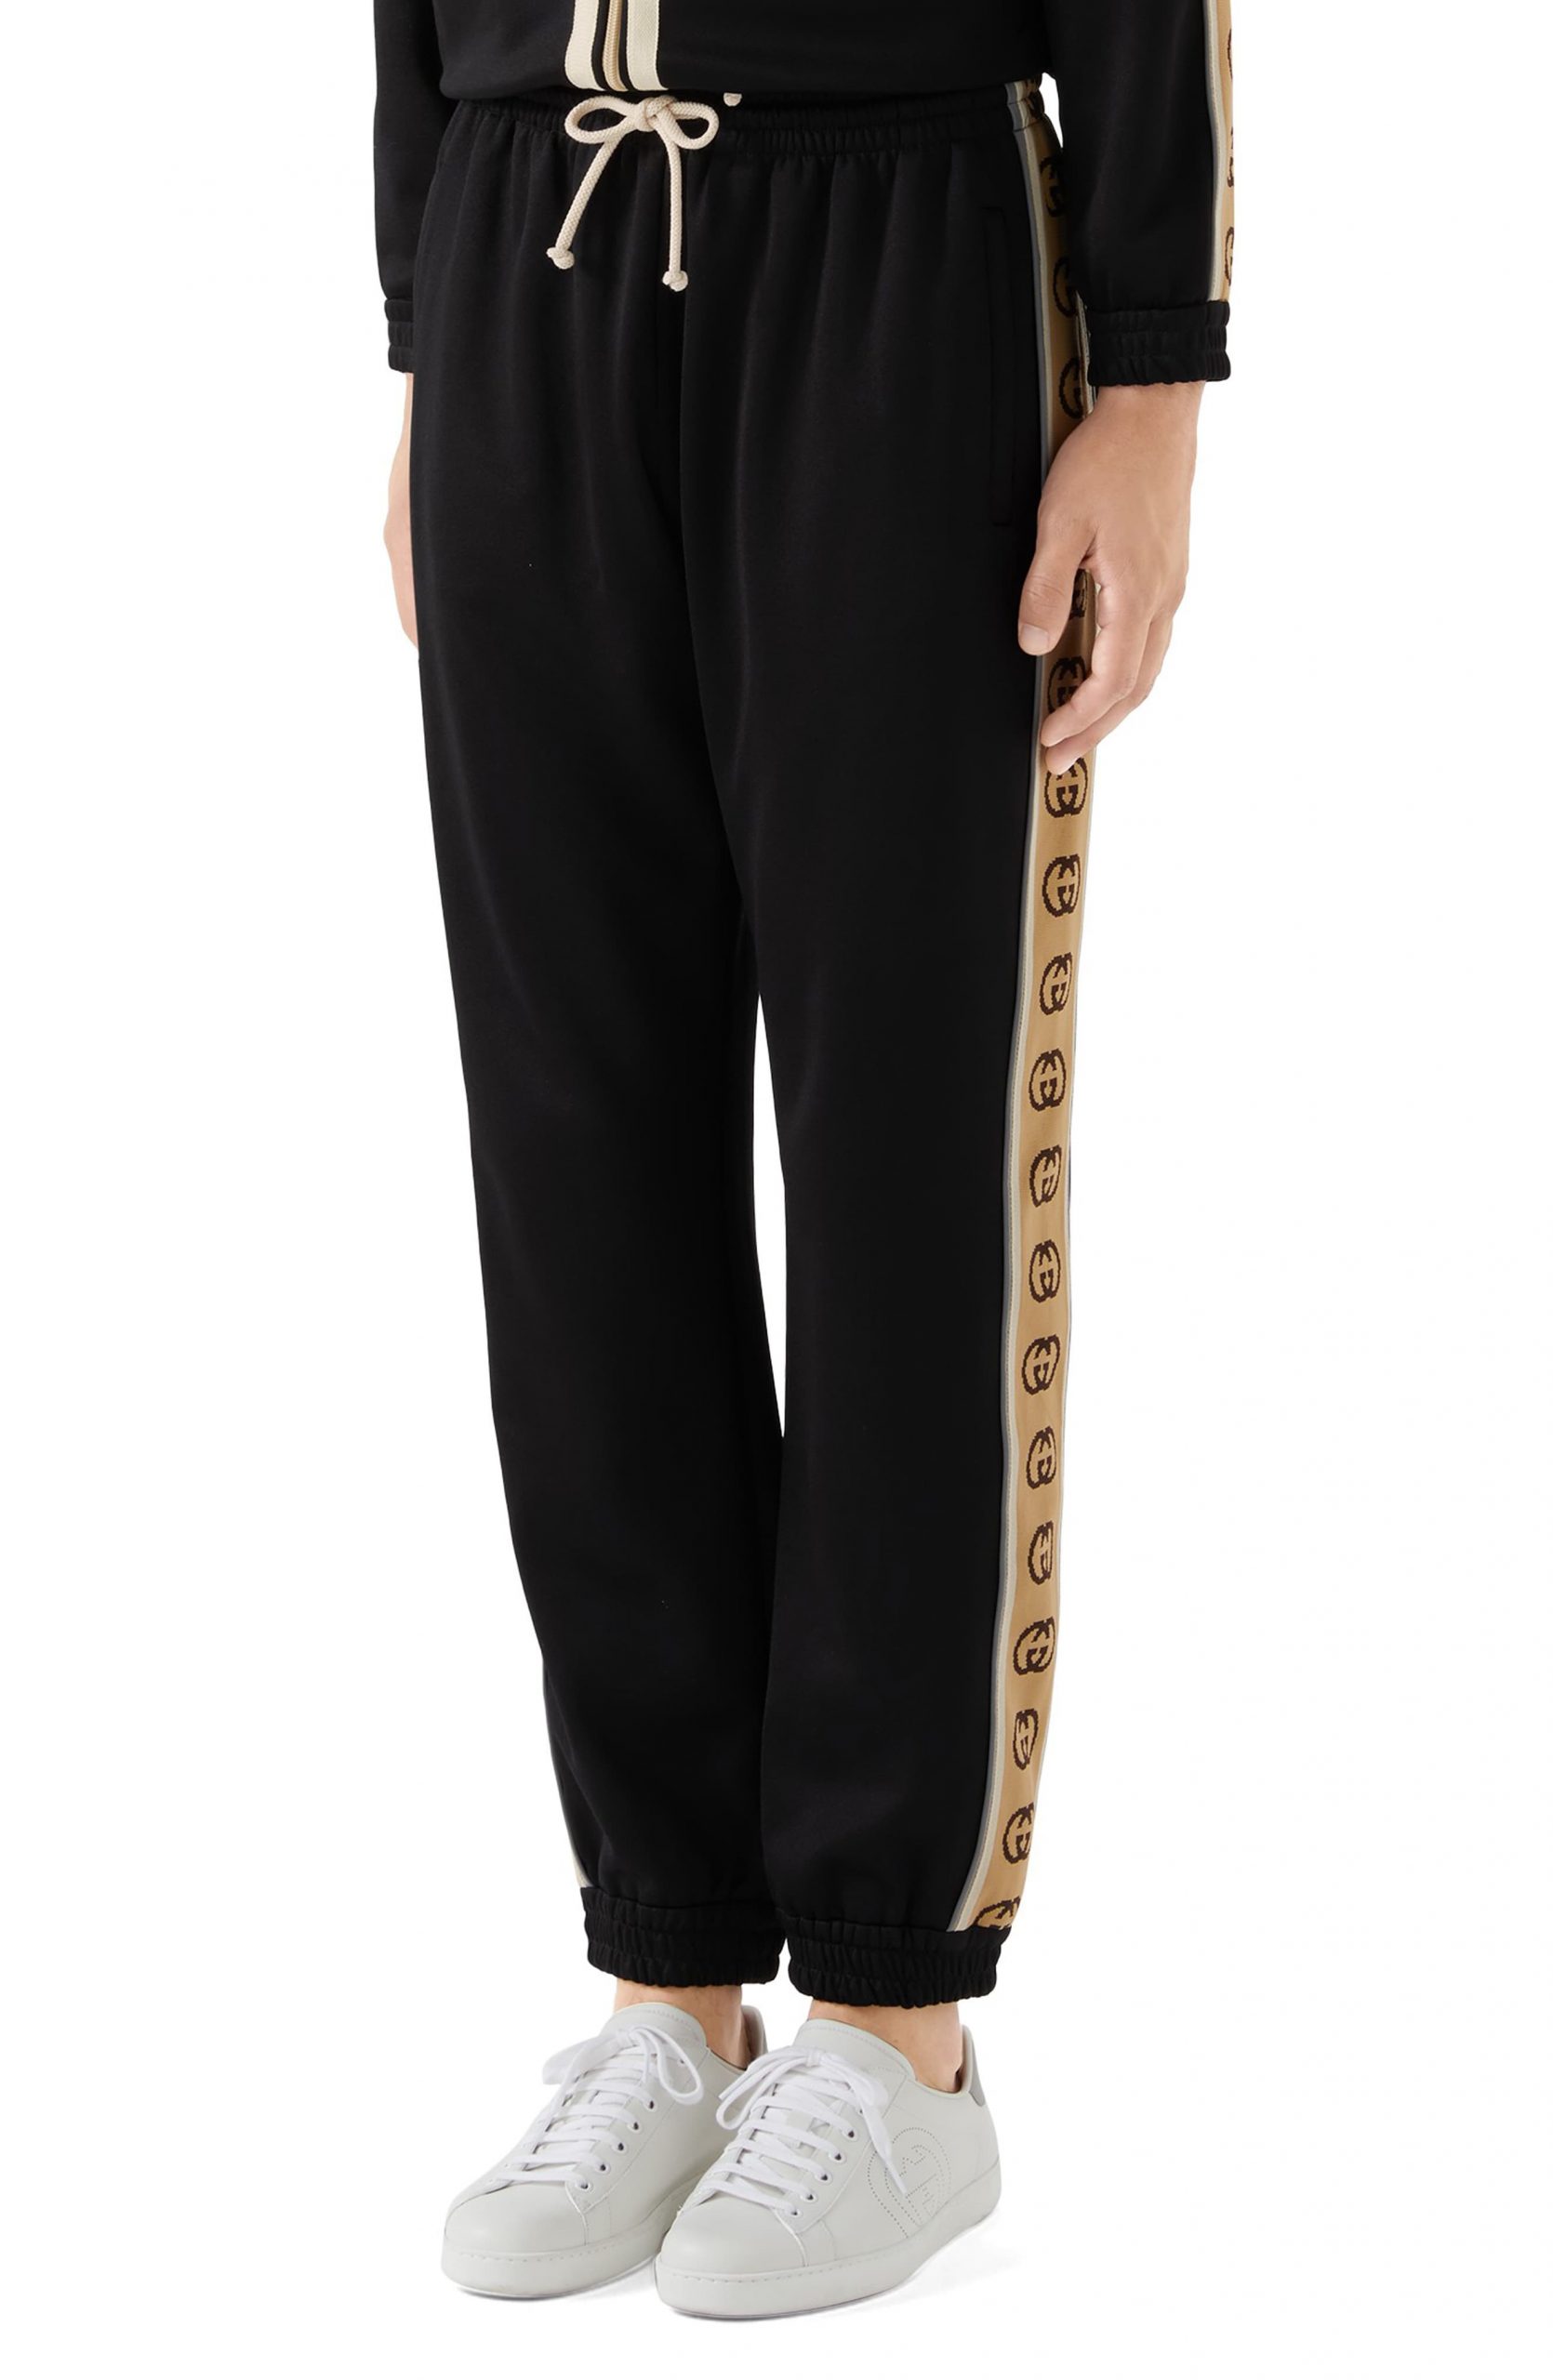 Gucci Jogging Pants Top Sellers, 51% OFF | lagence.tv